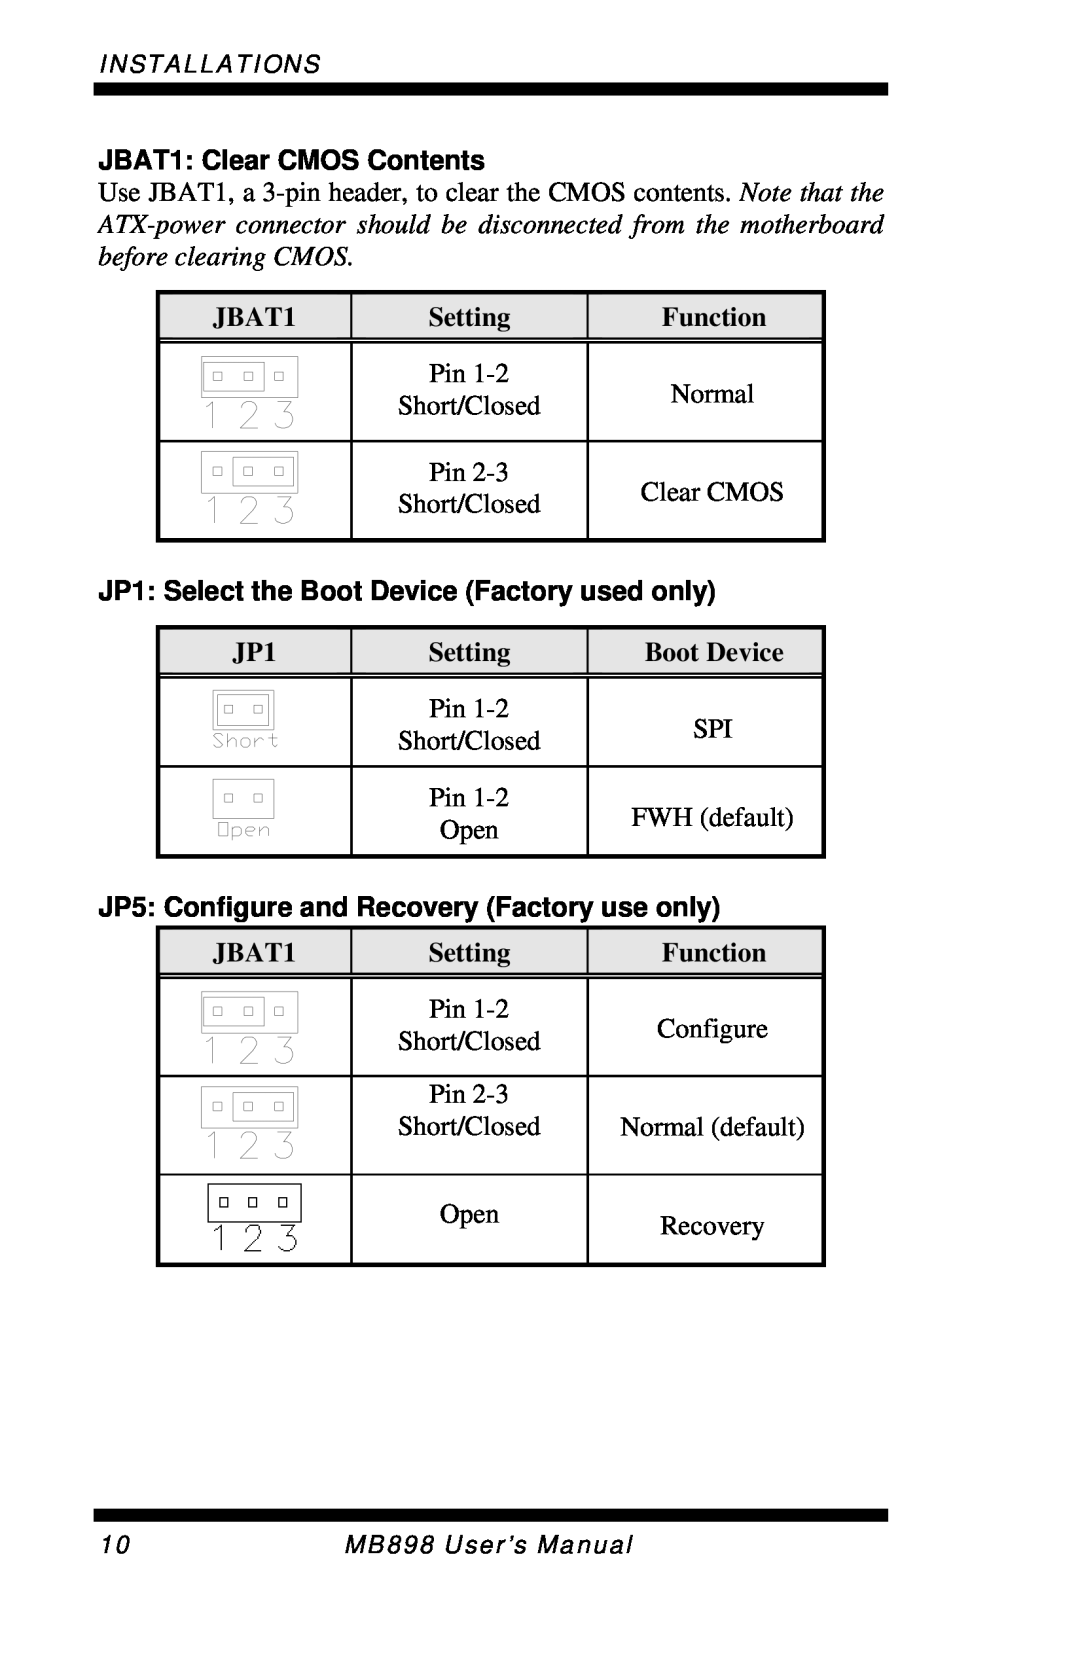 Intel MB898F, MB898RF JBAT1: Clear CMOS Contents, JP1: Select the Boot Device Factory used only, Setting, Function 